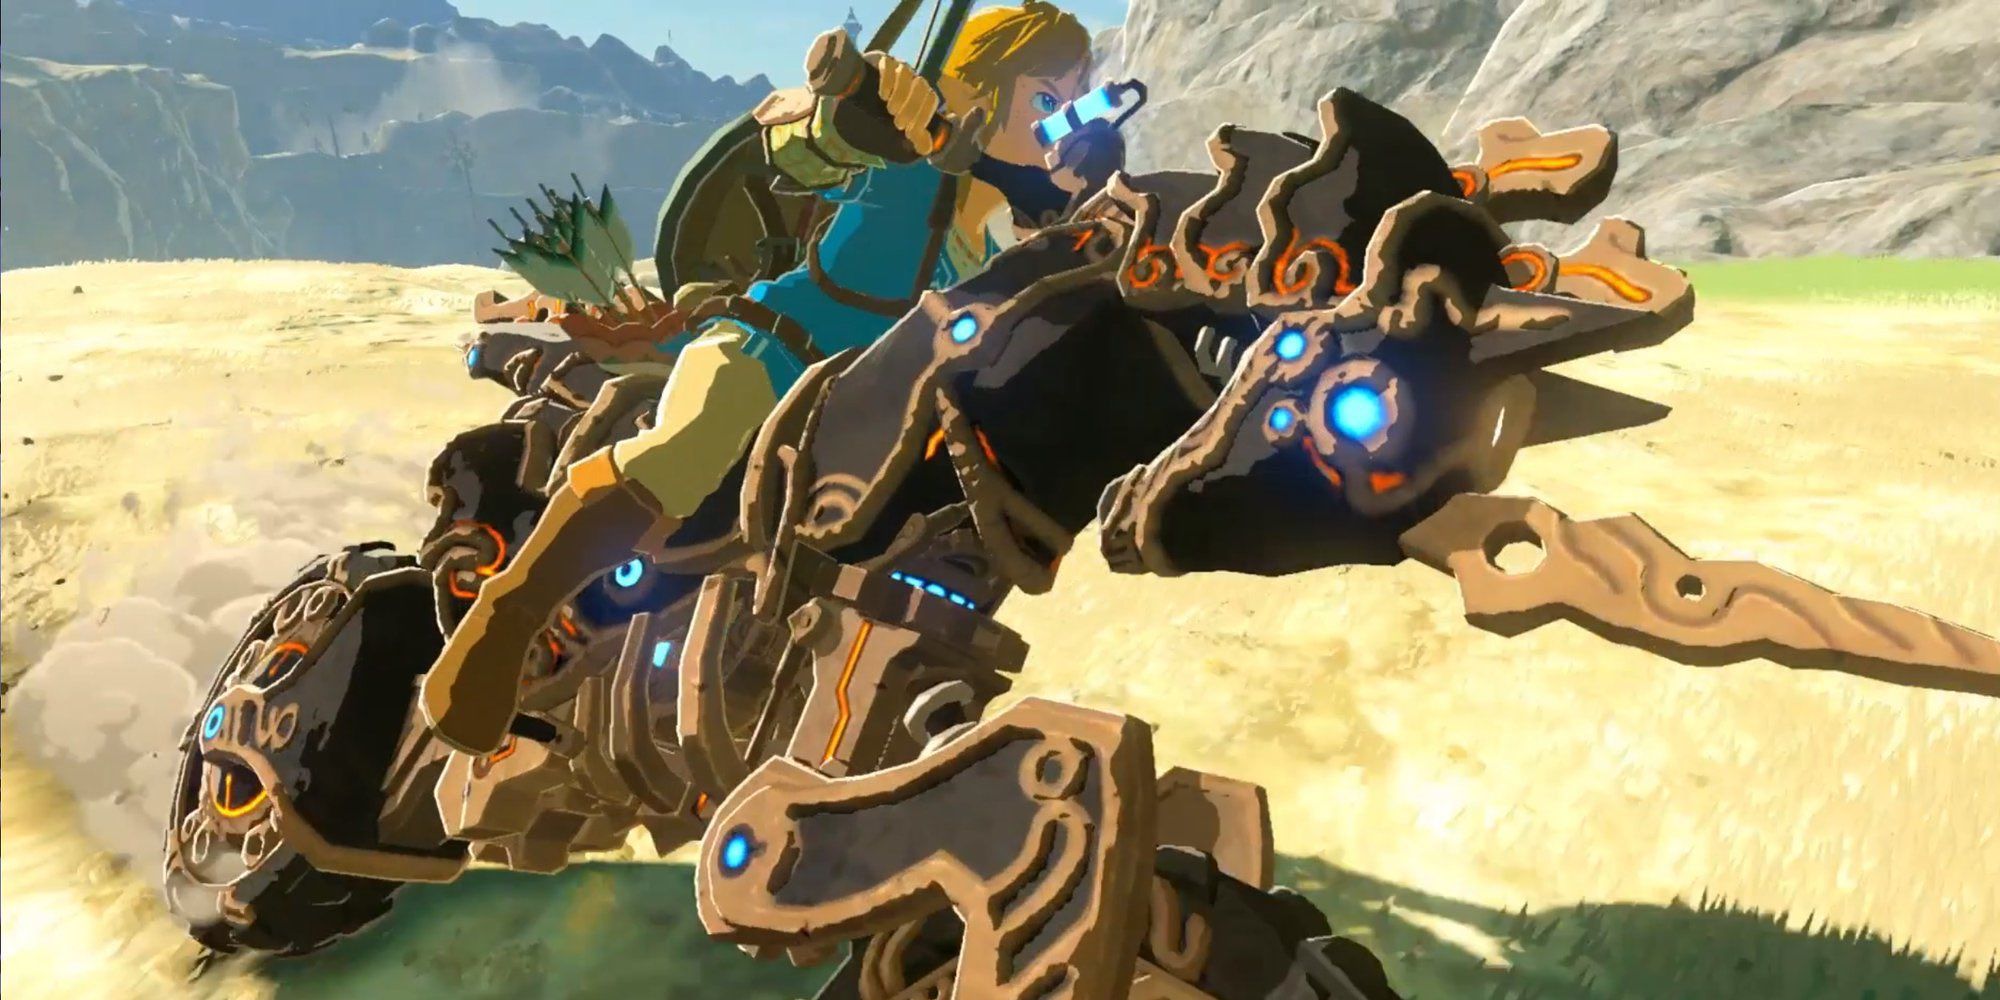 Link drifting around a field with his Master Cycle Zero motorbike 